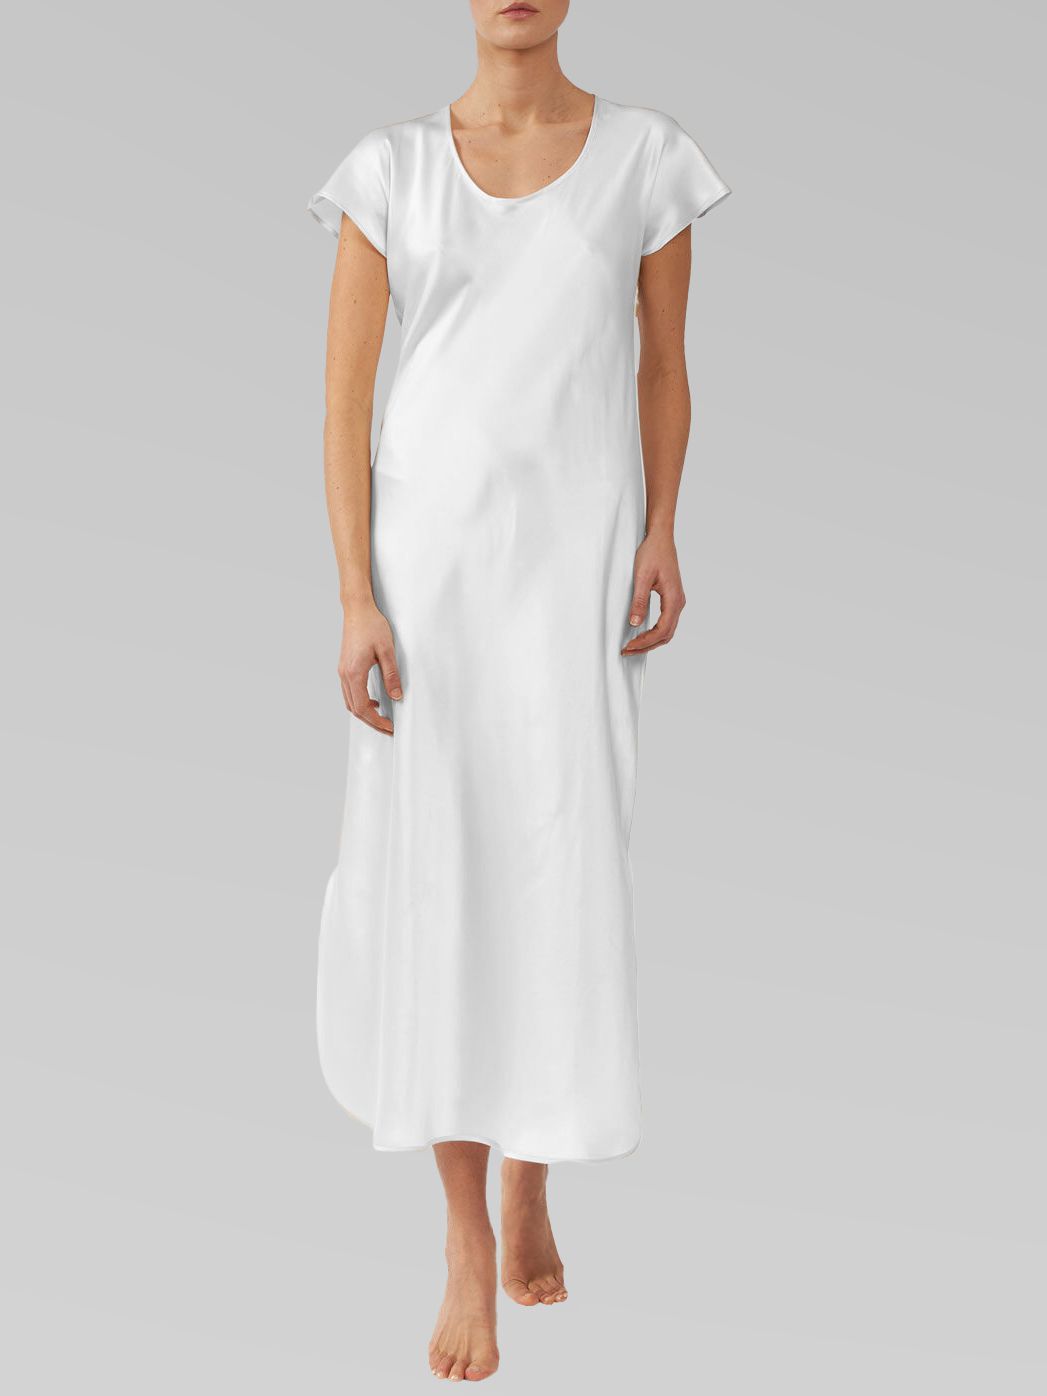 19 Momme Short Sleeve Silk Nightgown with Soft Lace Trim [FS095] - $149.00  : FreedomSilk, Best Silk Pillowcases, Silk Sheets, Silk Pajamas For Women, Silk  Nightgowns Online Store